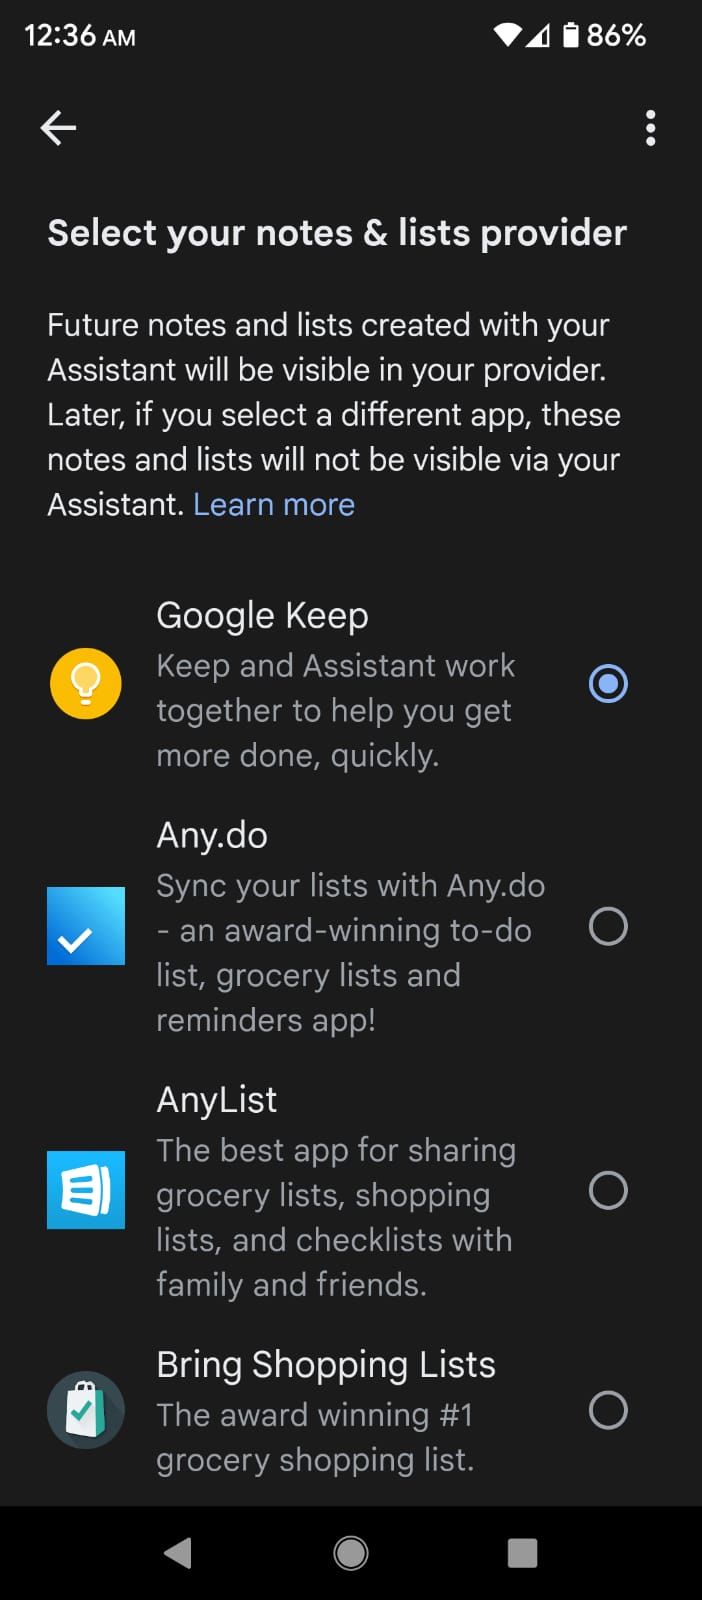 Selecting Google Keep as the notes and lists provider for Assistant